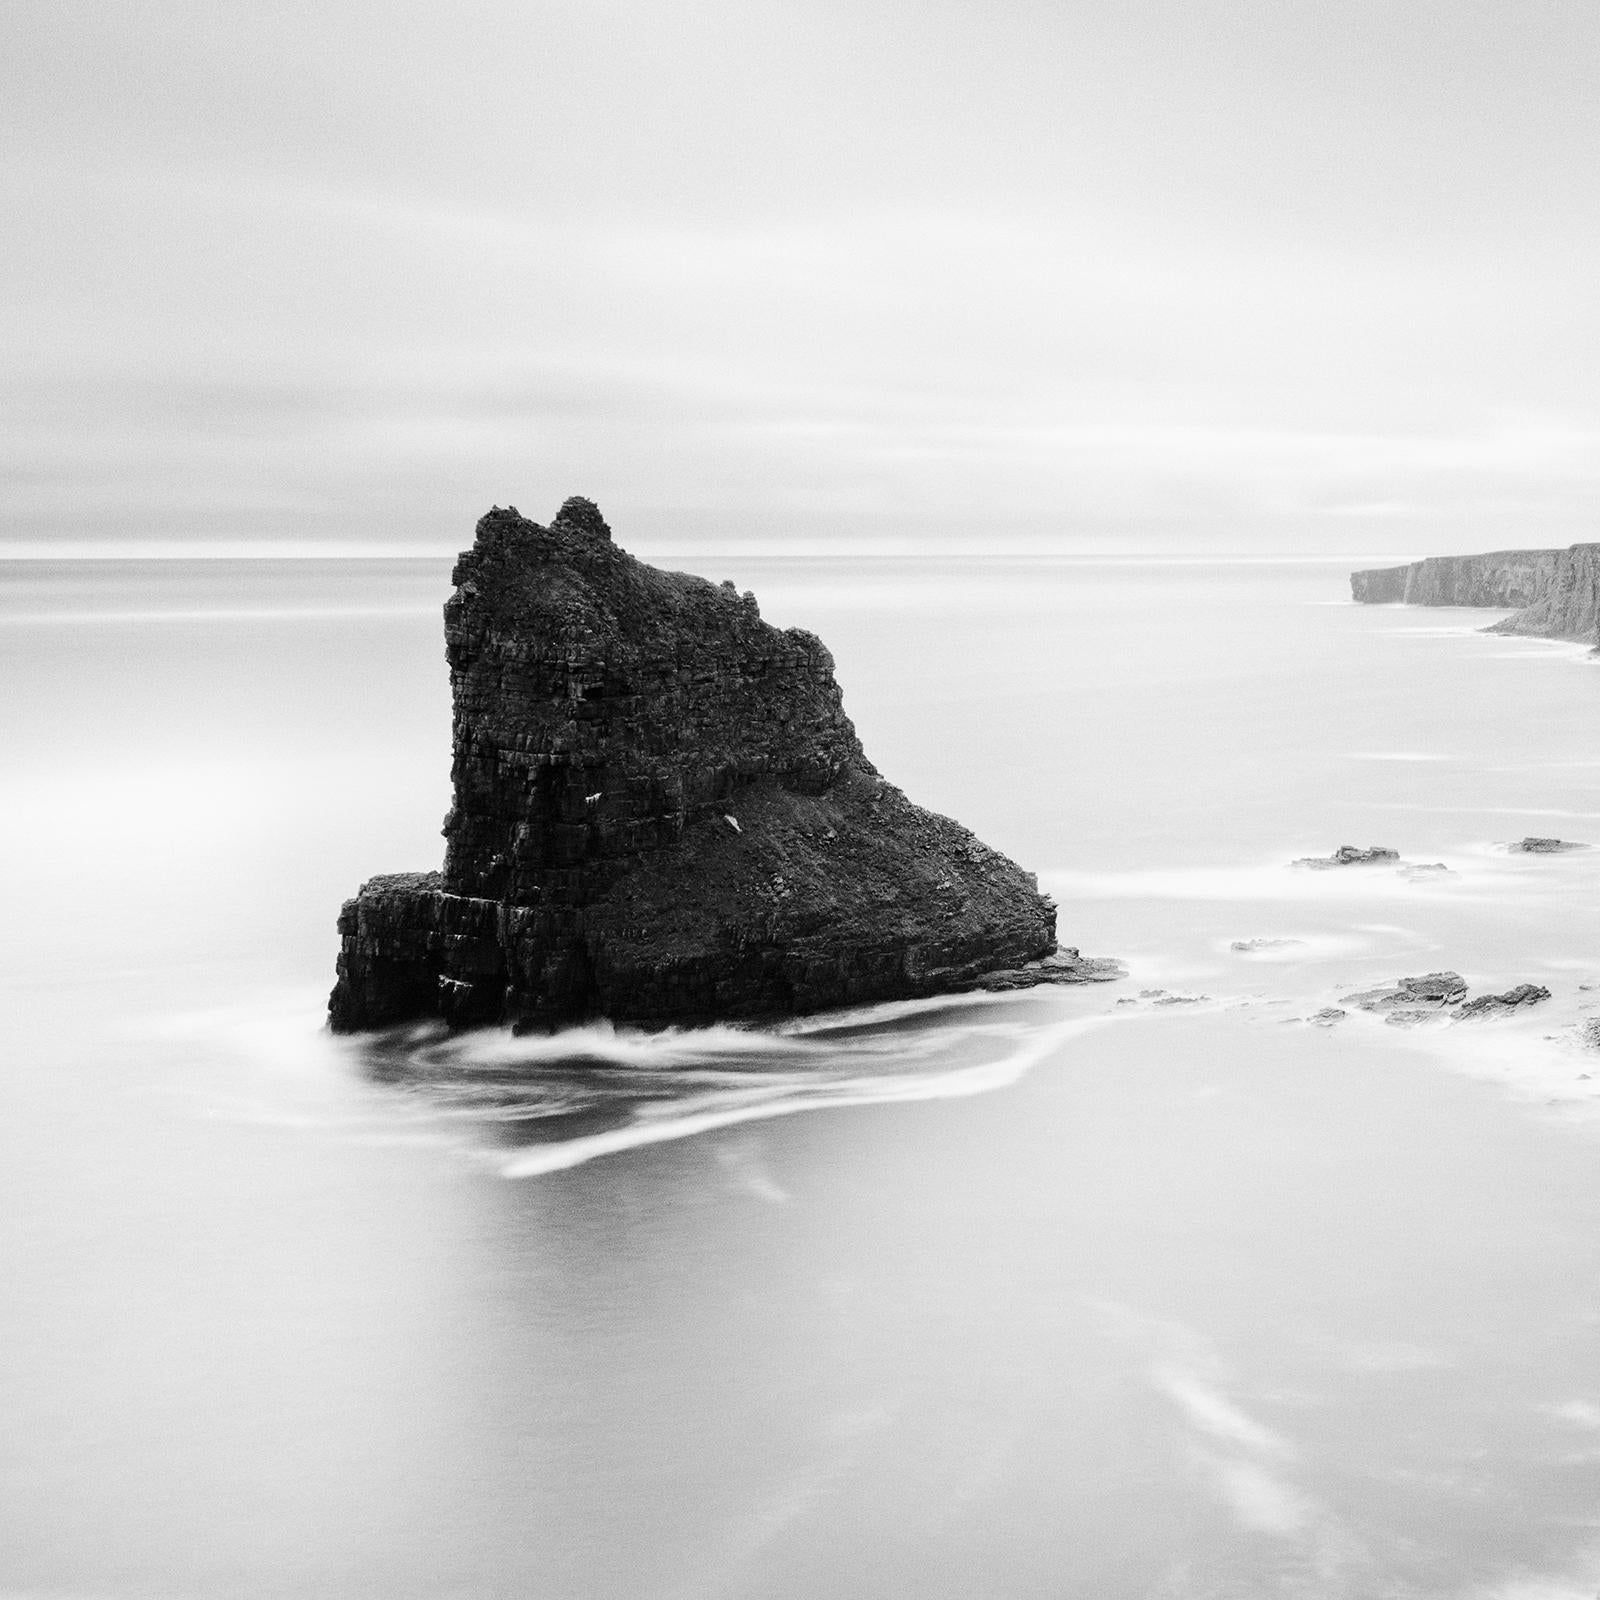 Surreal Moment, Cliff, Island, Scotland, black and white photography, landscape For Sale 3